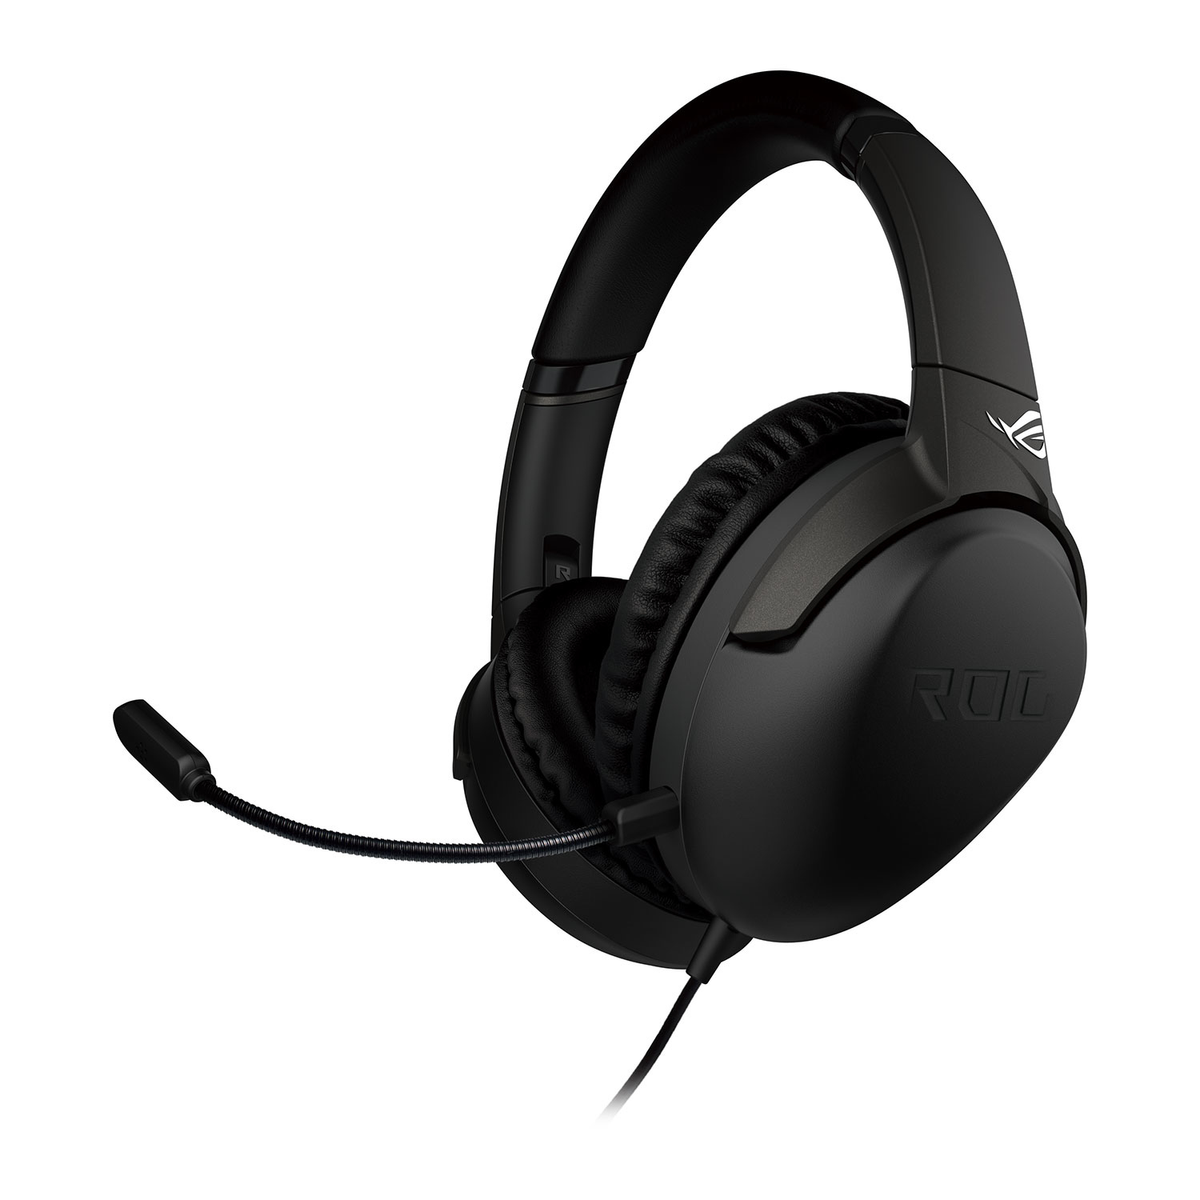 ASUS Go Schwarz Core, Gaming On-ear Headset